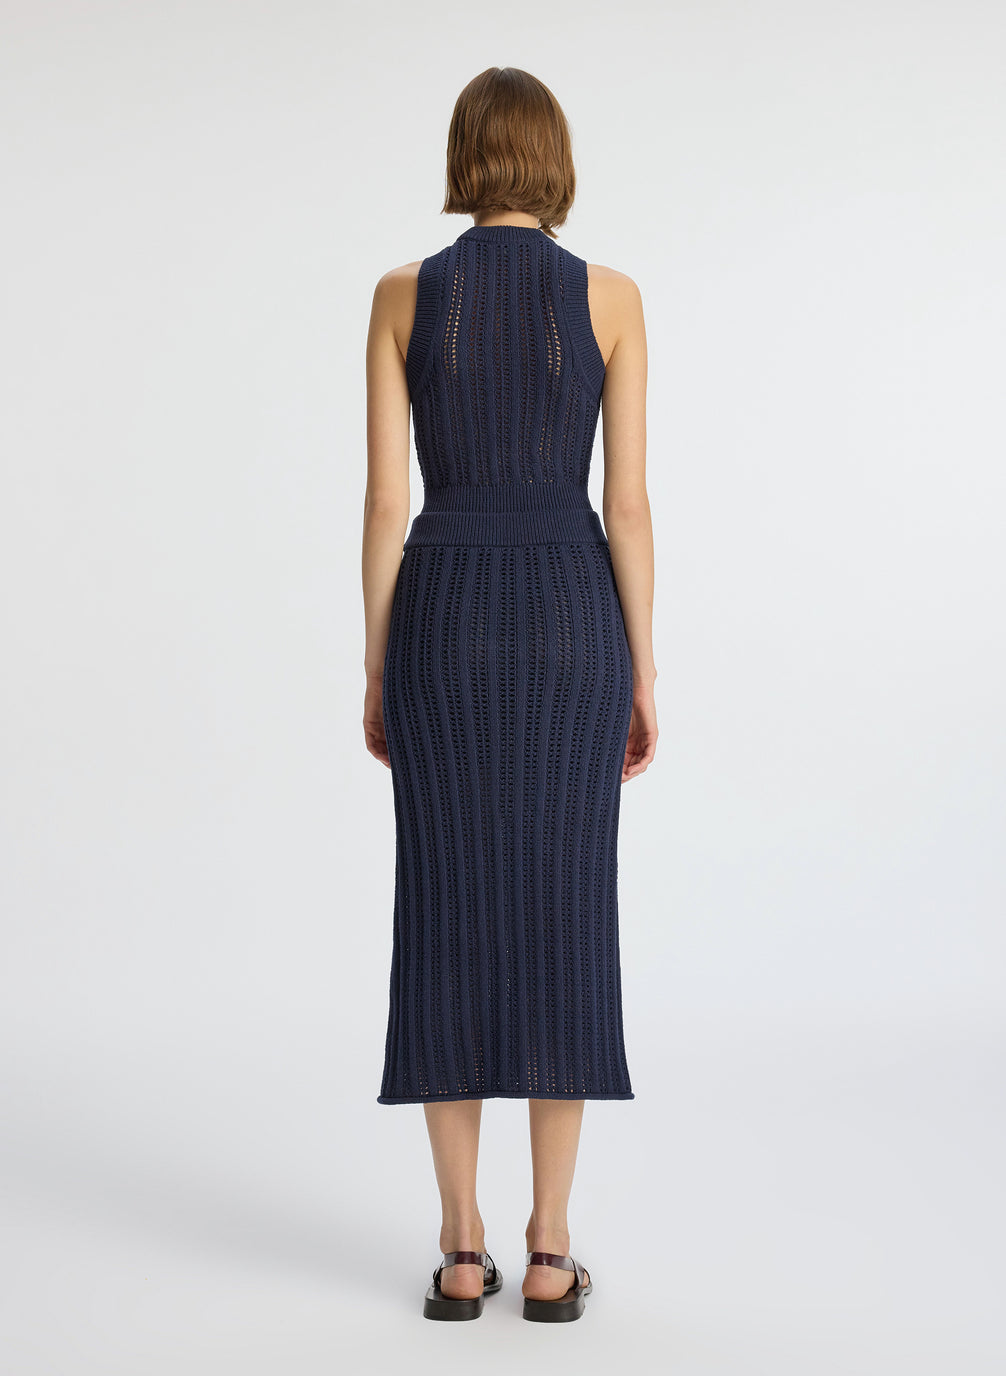 back view of woman wearing navy blue open weave tank top and matching skirt